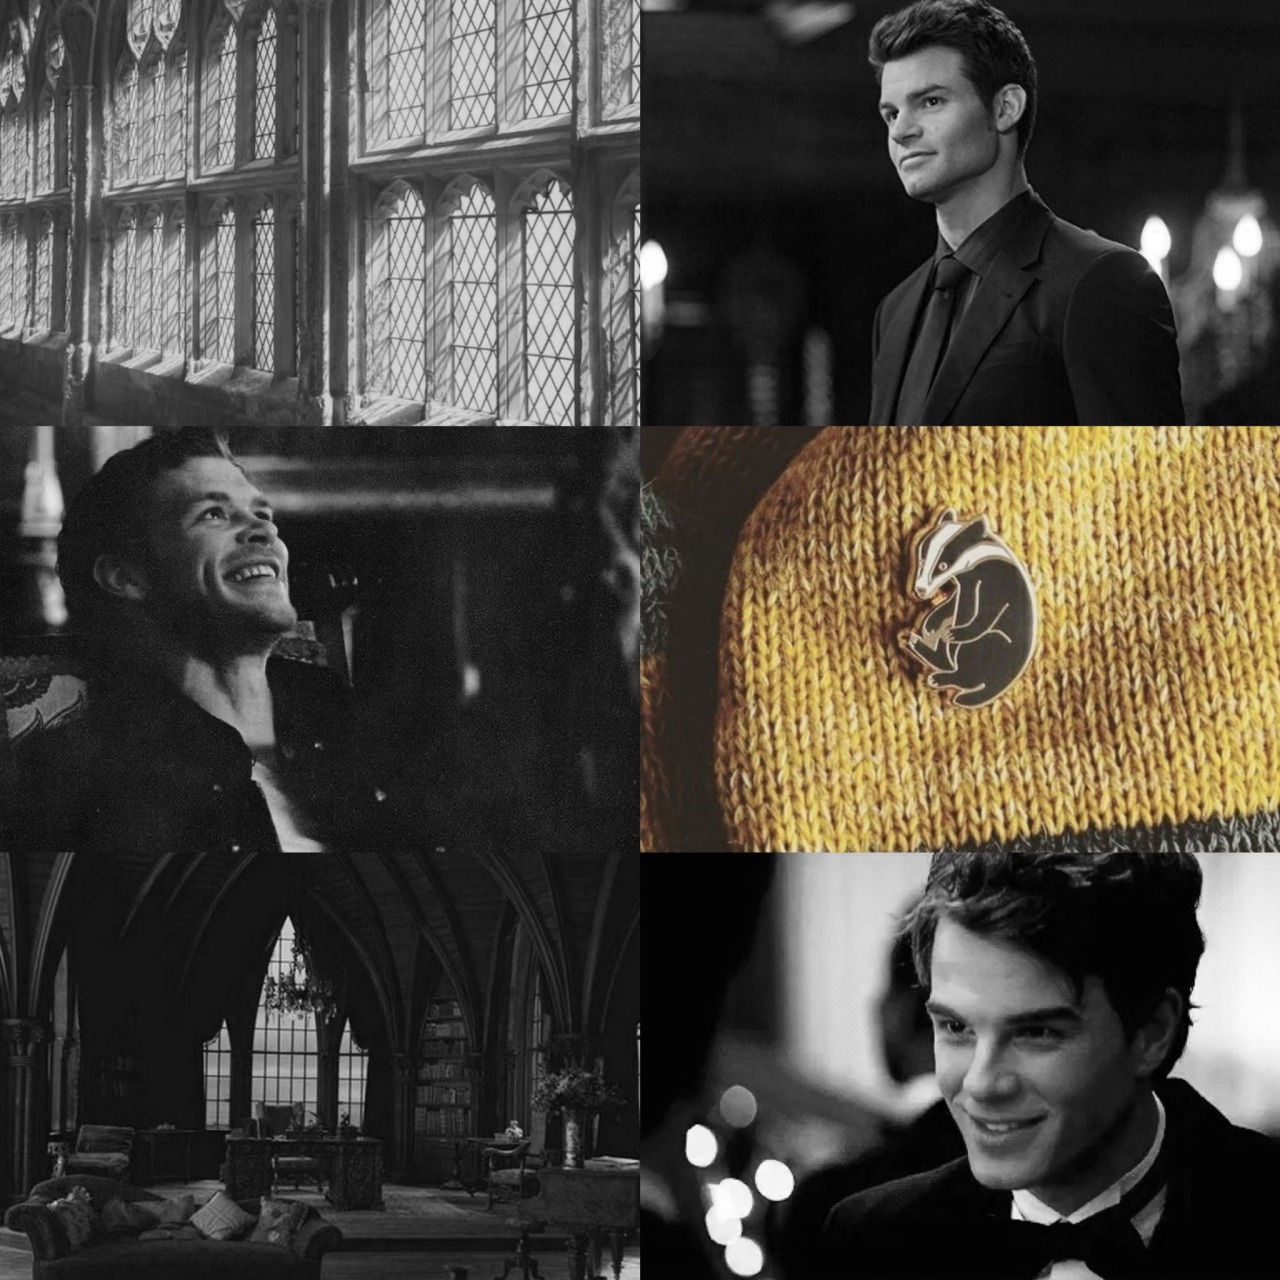 All Fandom Oneshots• — Kol Mikaelson X Reader: Heightened Emotions